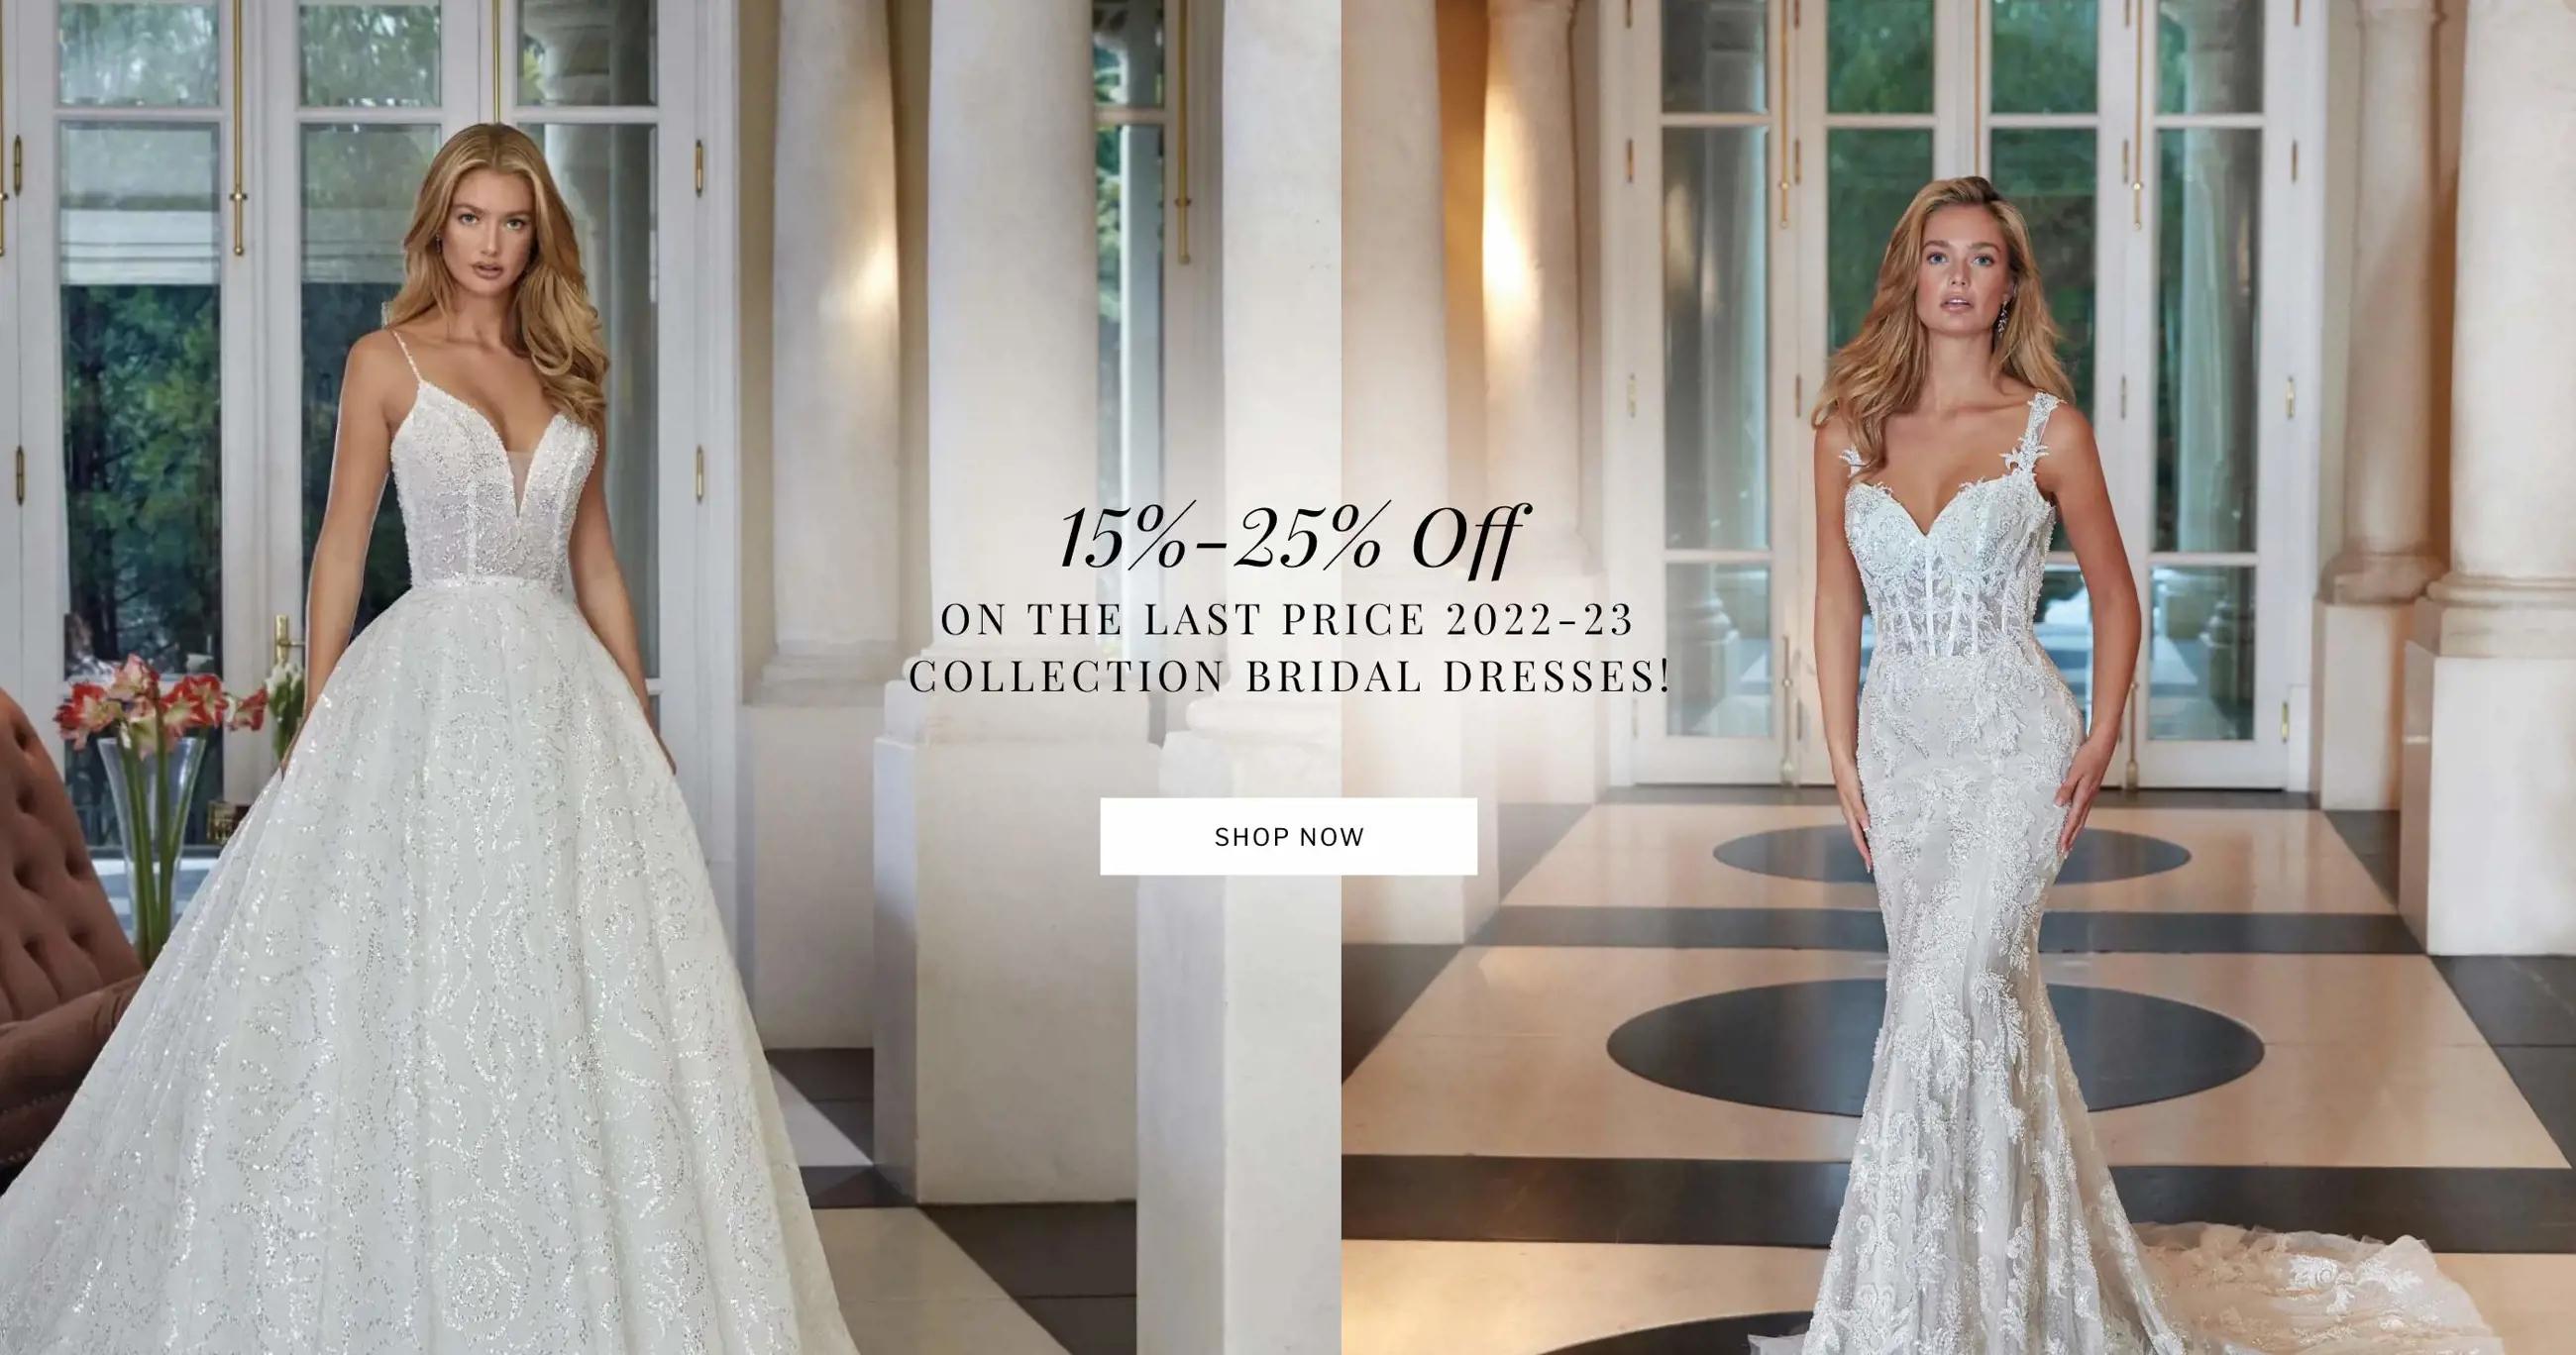 Banner Promoting Bridal Gown Promotion